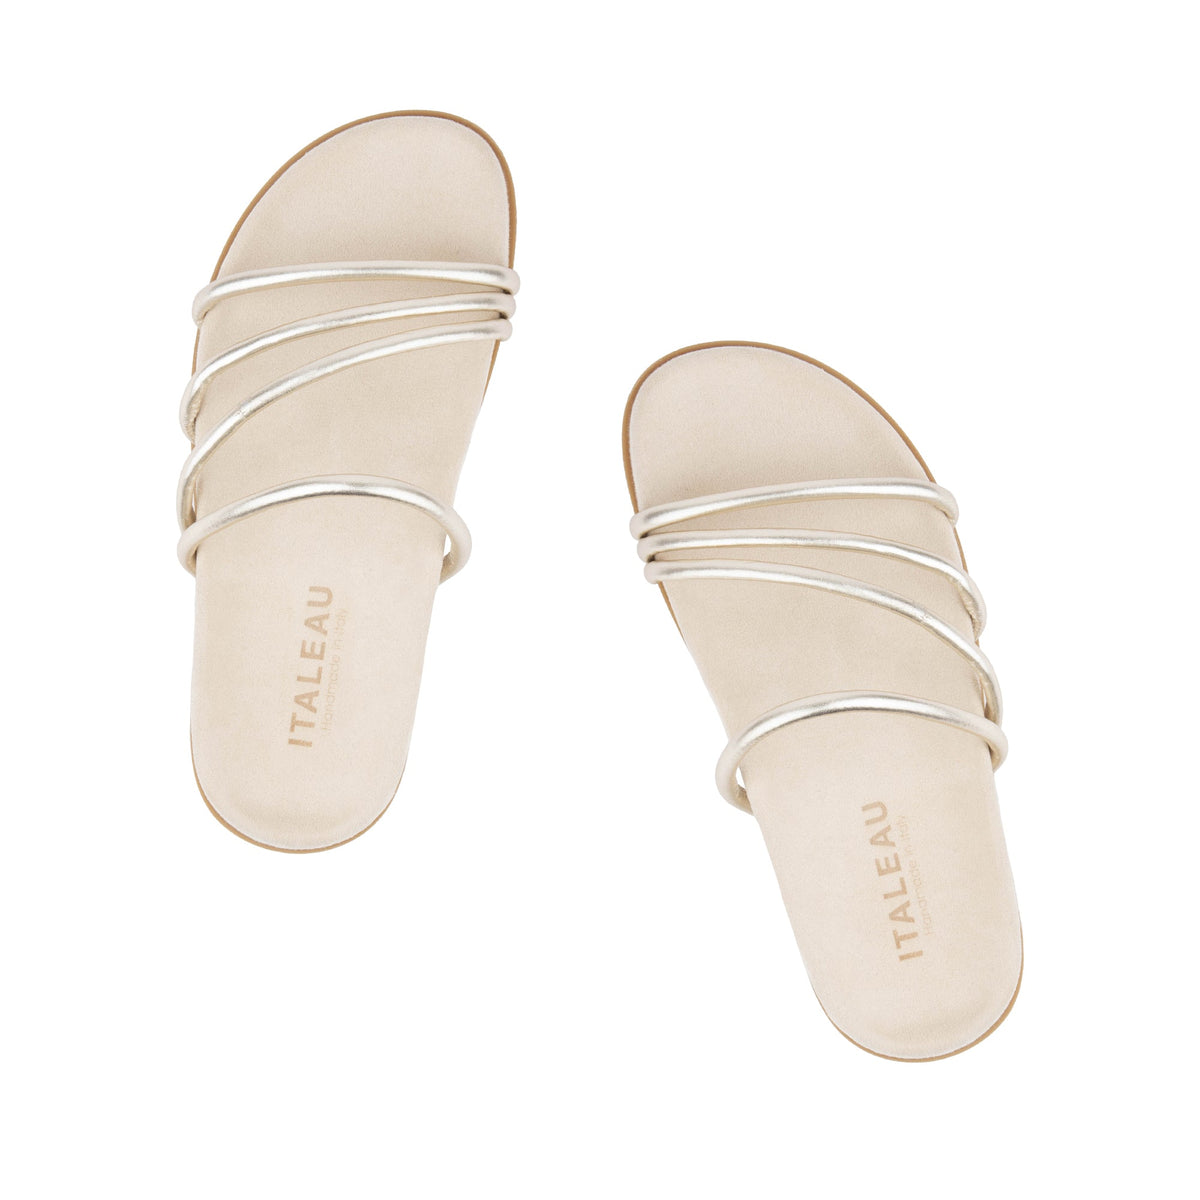 Italeau Milena slides are comfortable, stylish and handmade in Italy